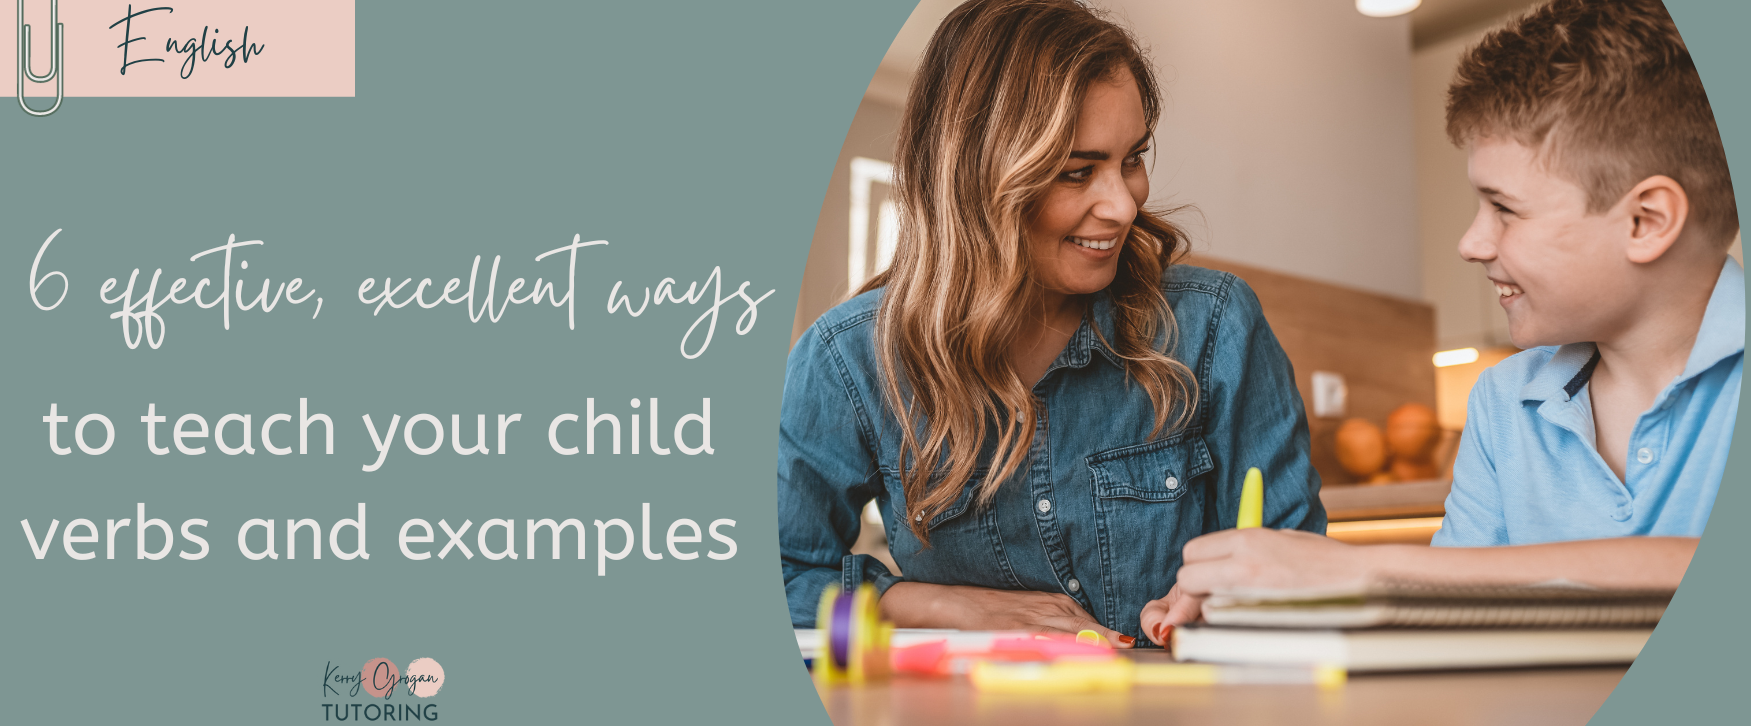 6 effective, excellent ways to teach your child verbs and examples.